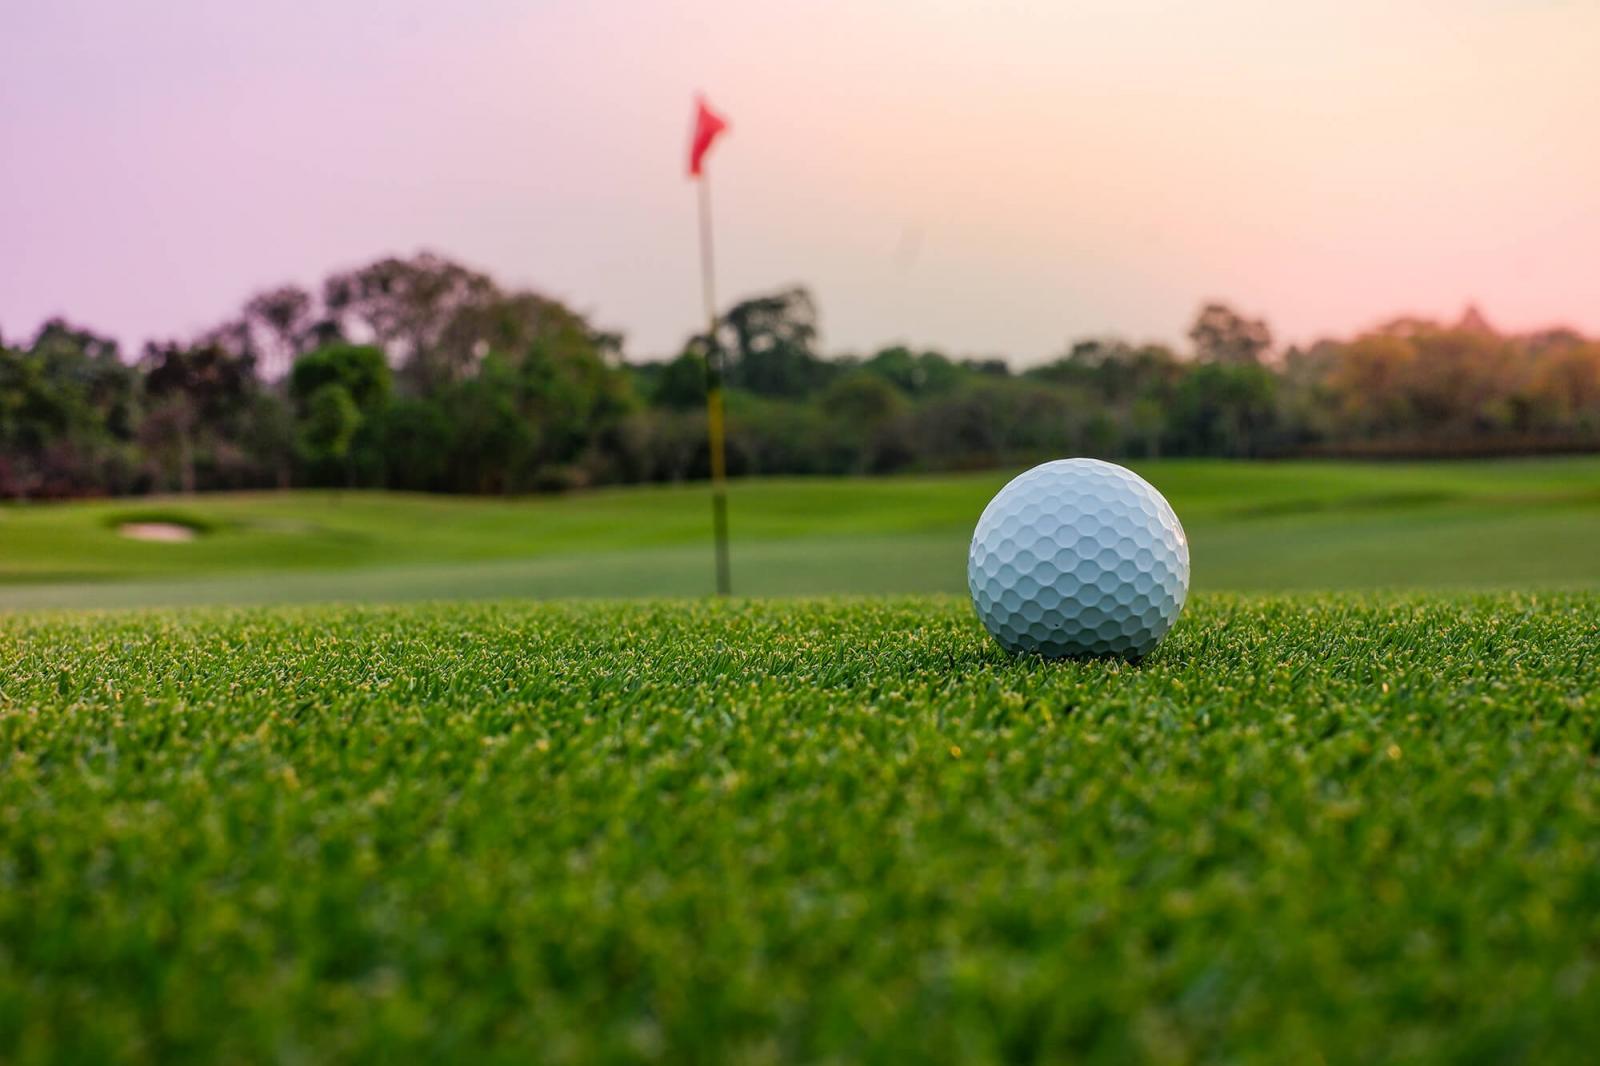 The government also announced golf courses in the province can open May 22.